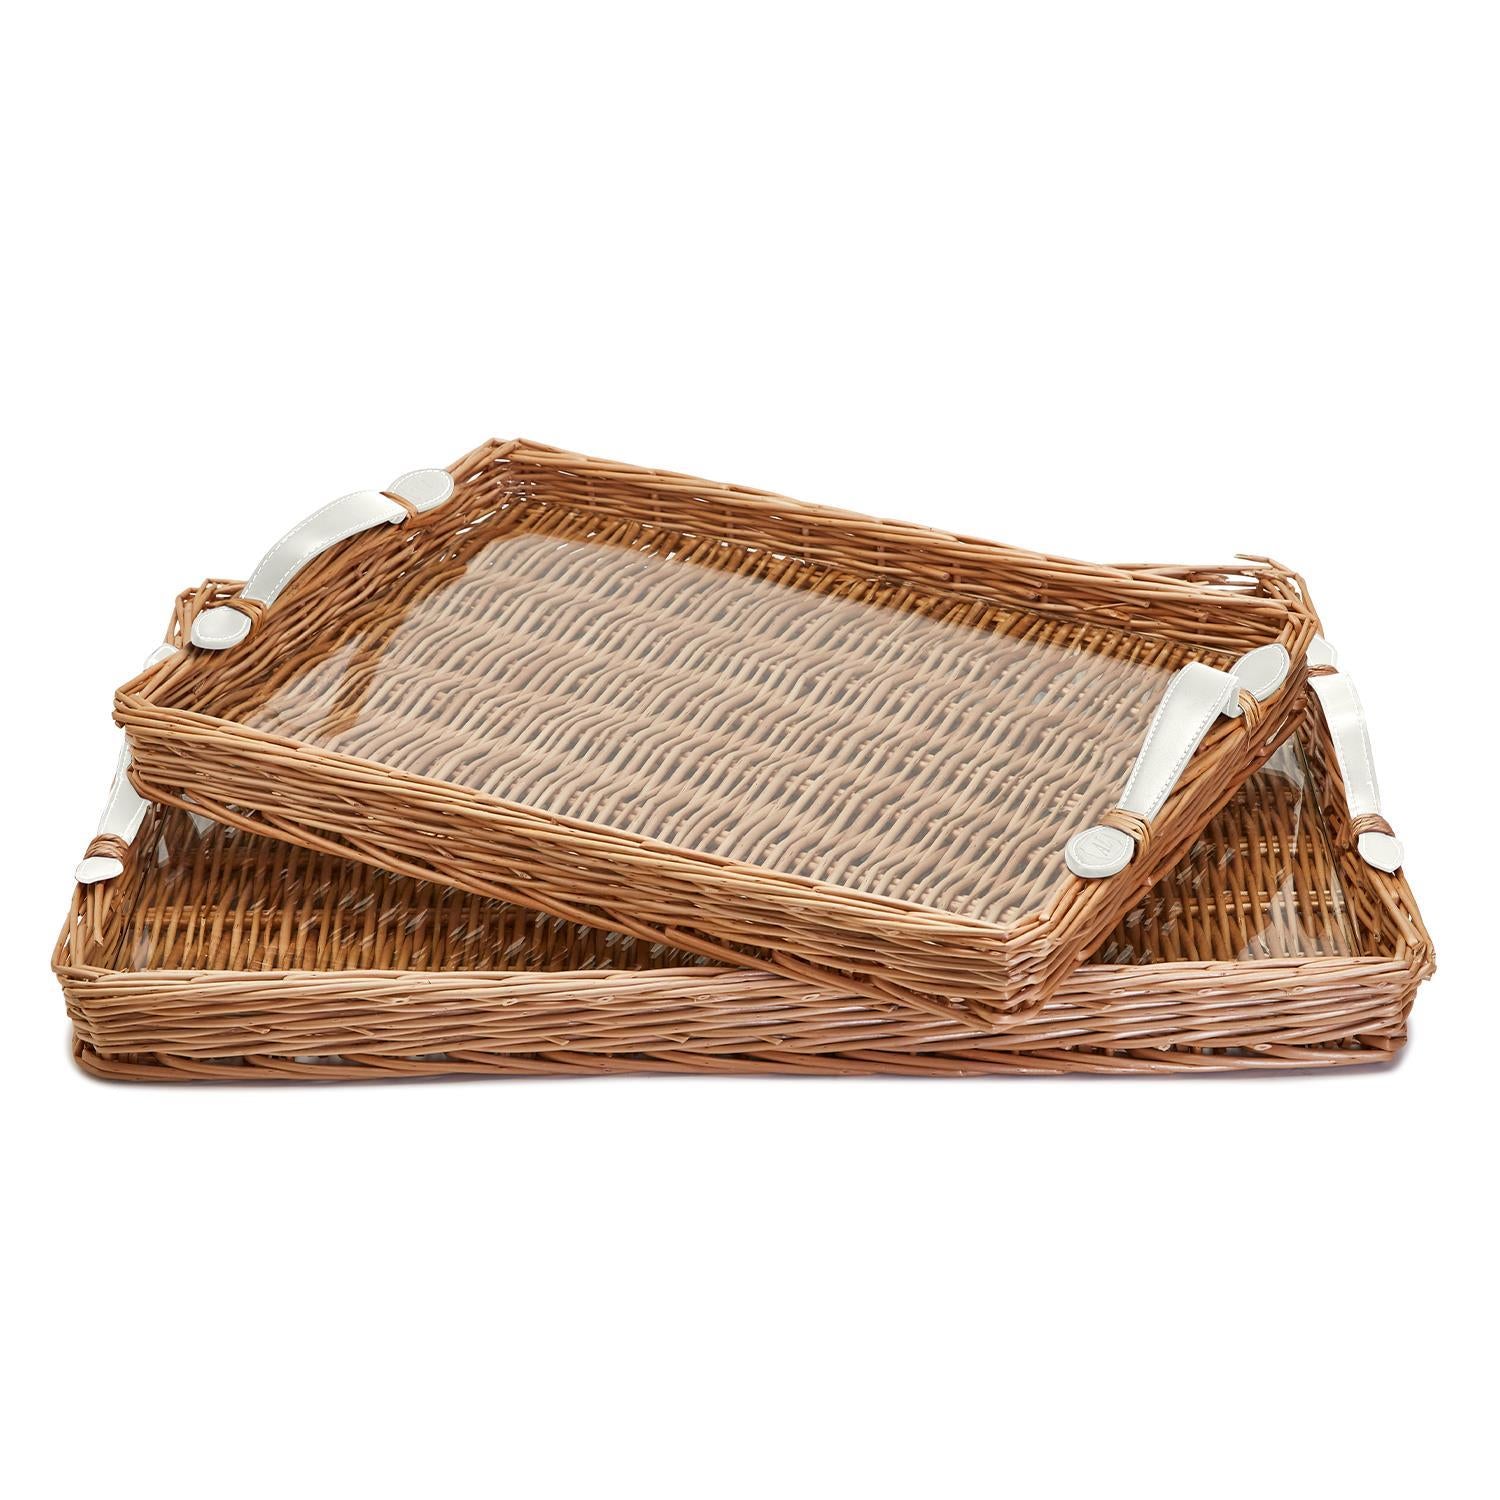 Rectangular Wicker Tray with Handles Large